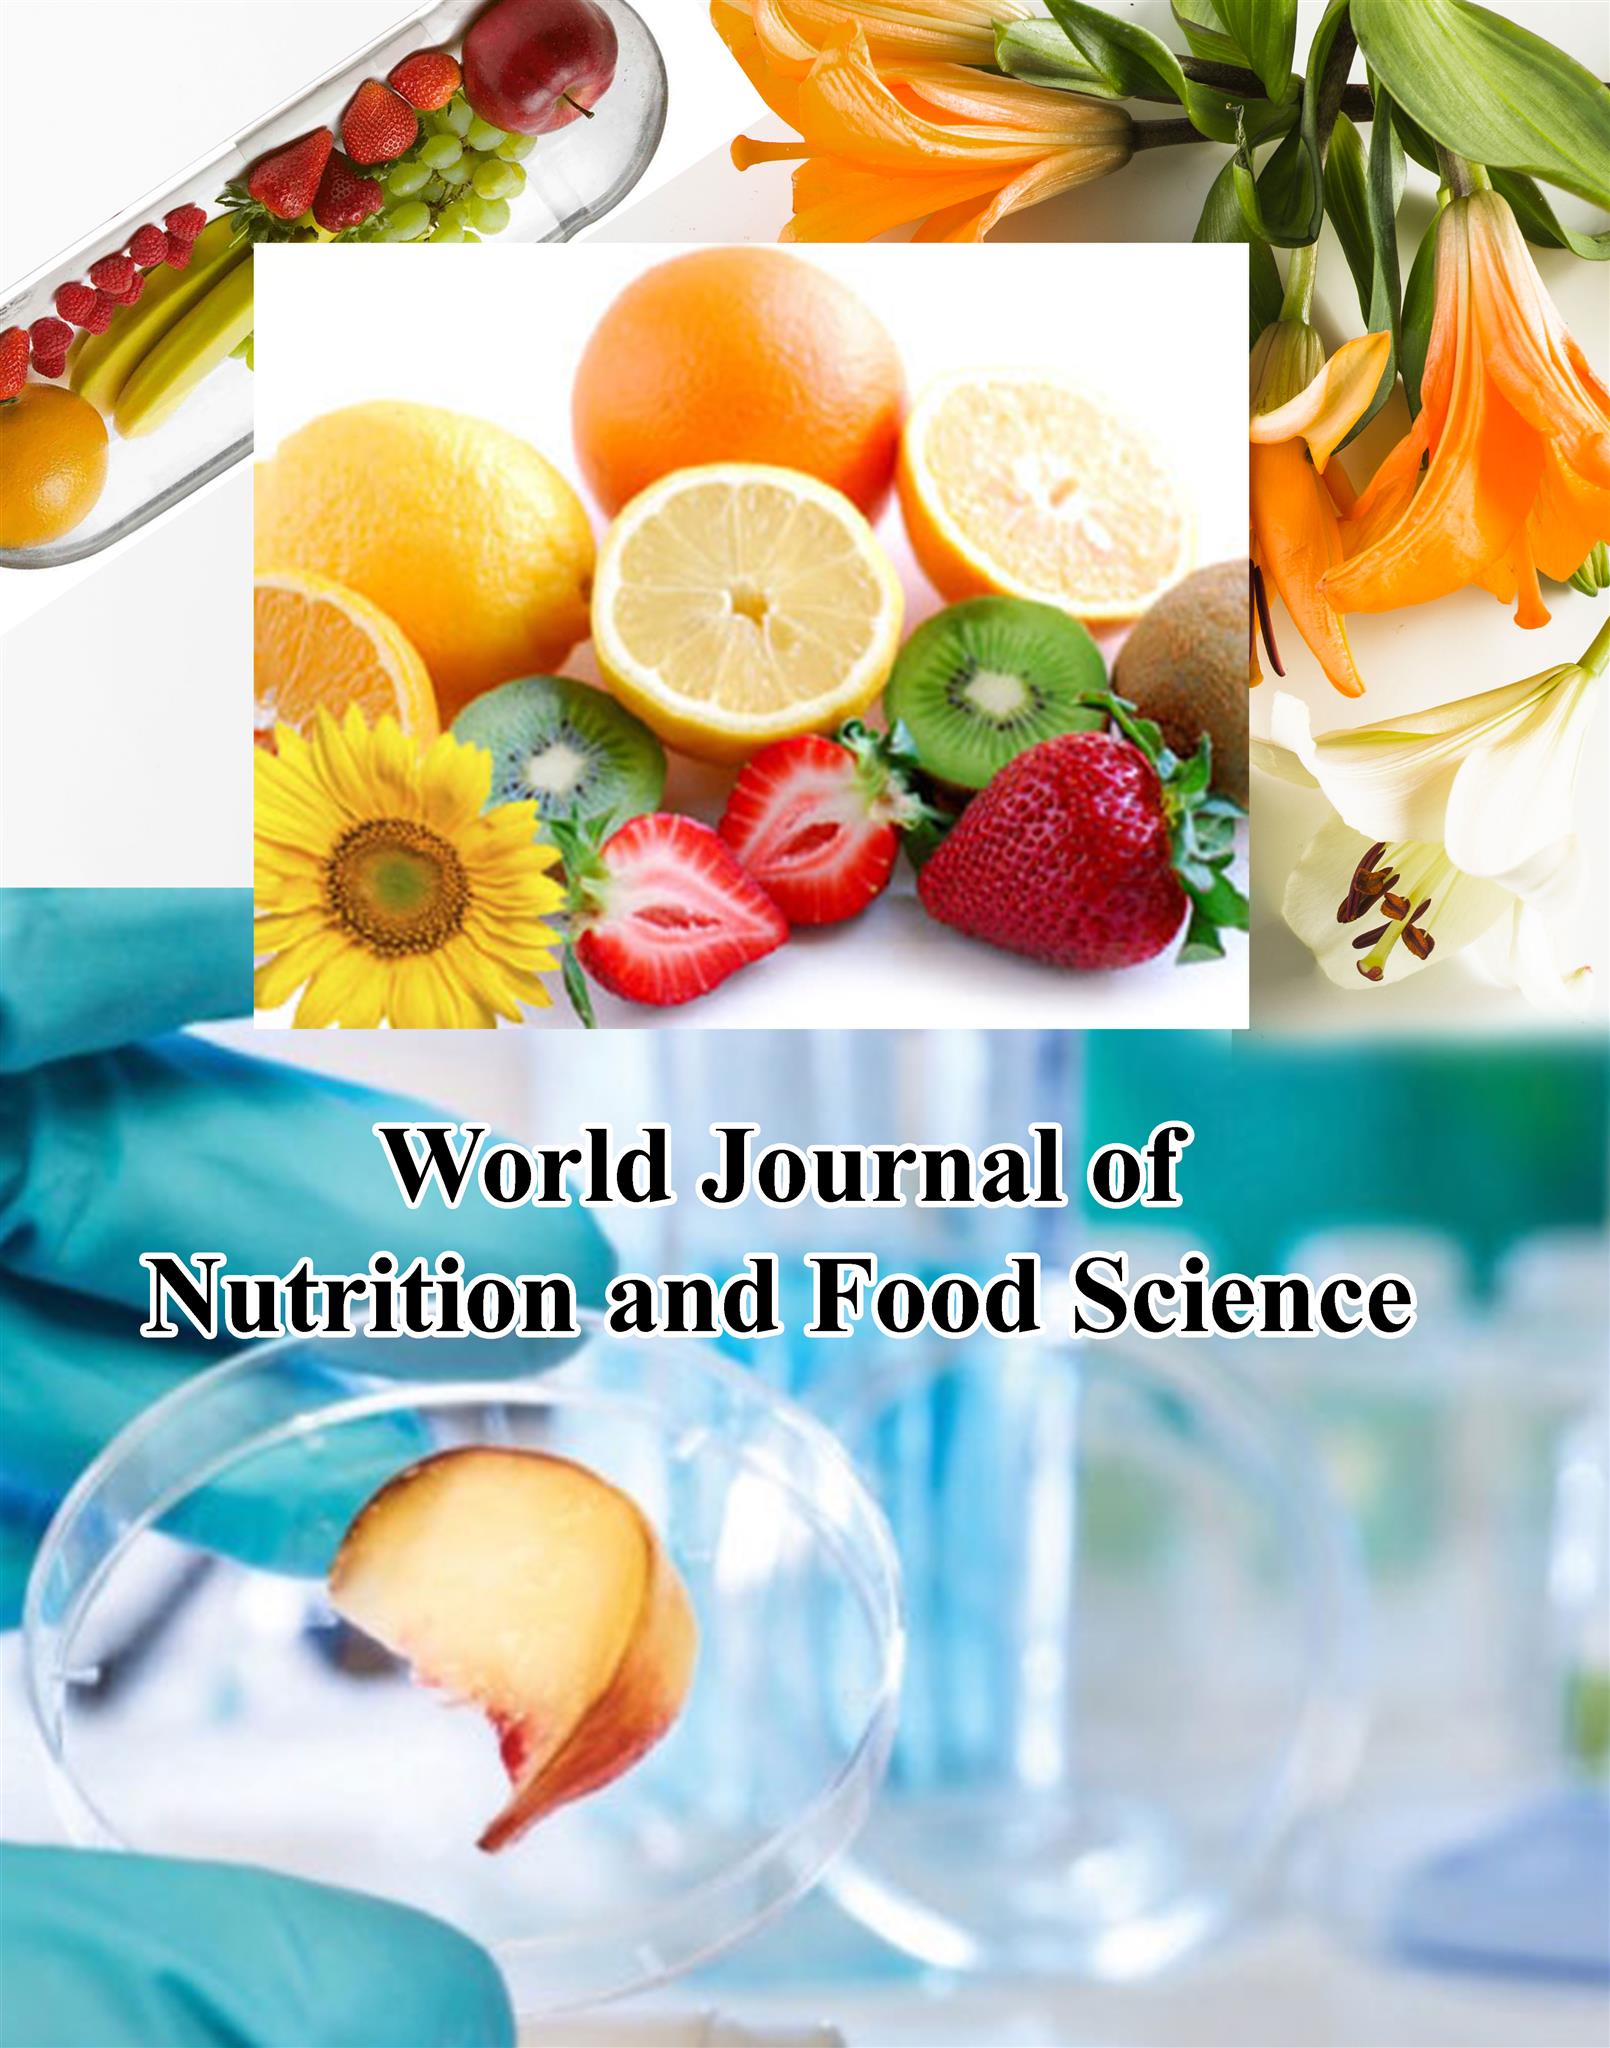 World Journal of Nutrition and Food Science